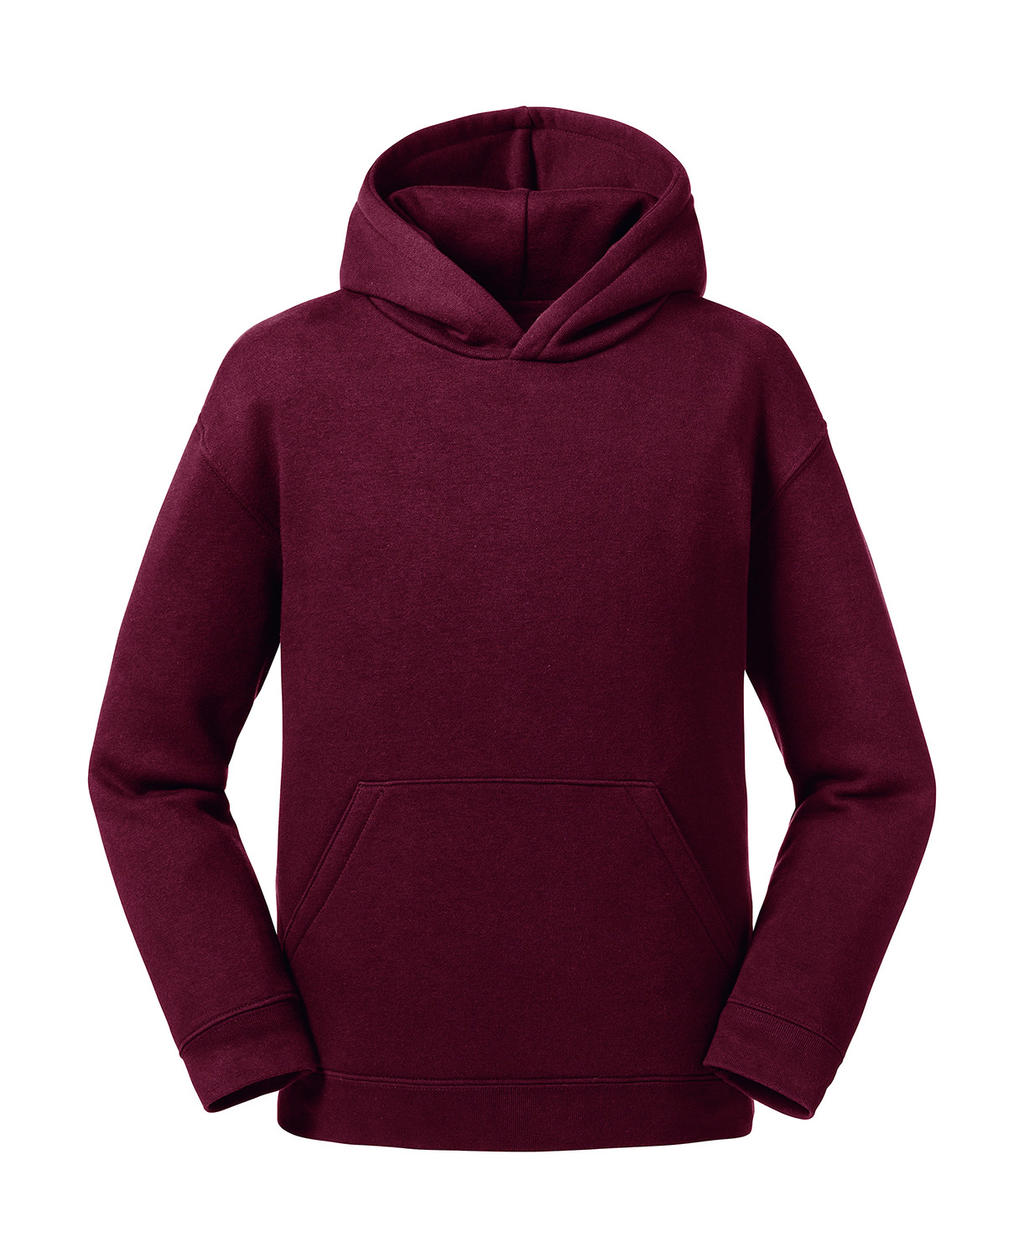  Kids Authentic Hooded Sweat in Farbe Burgundy